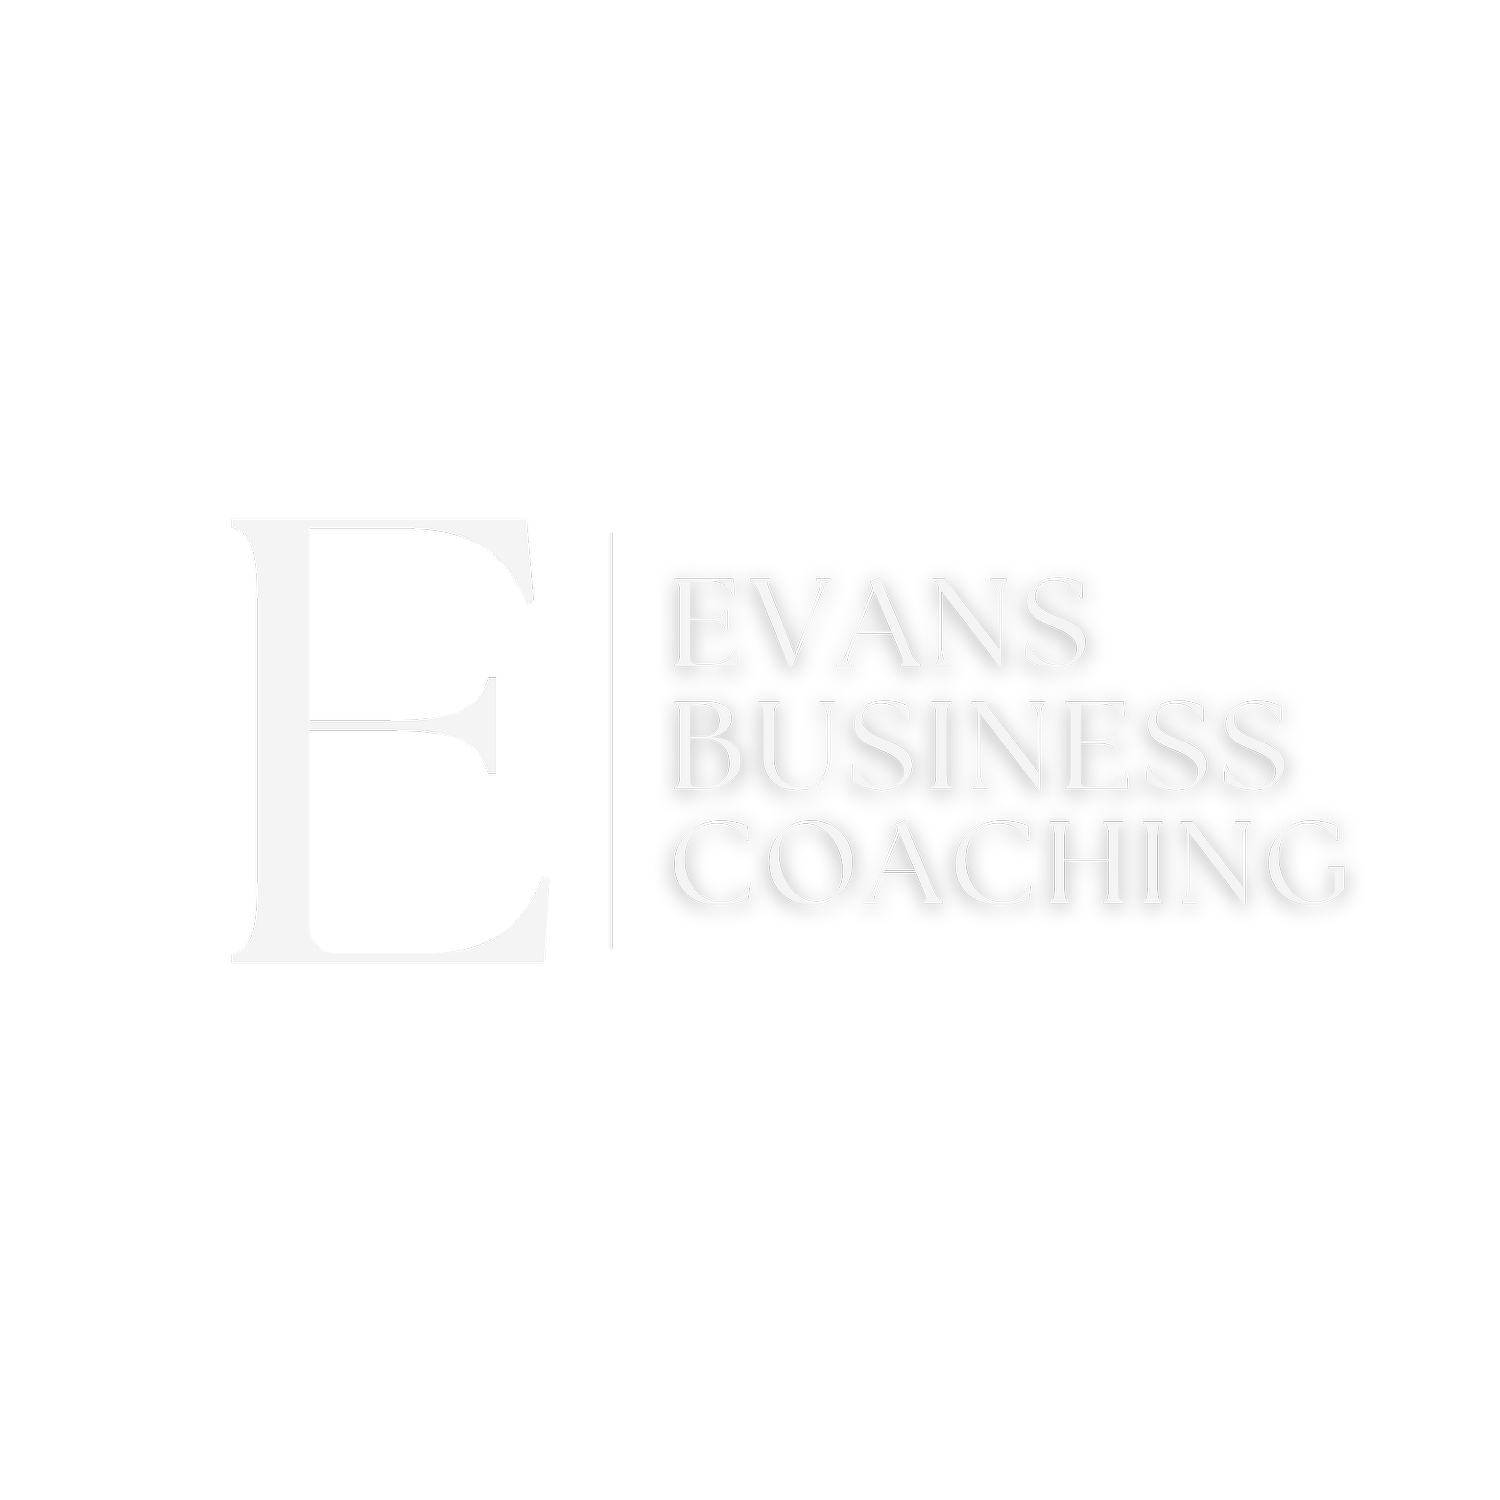 Evans Business Coaching